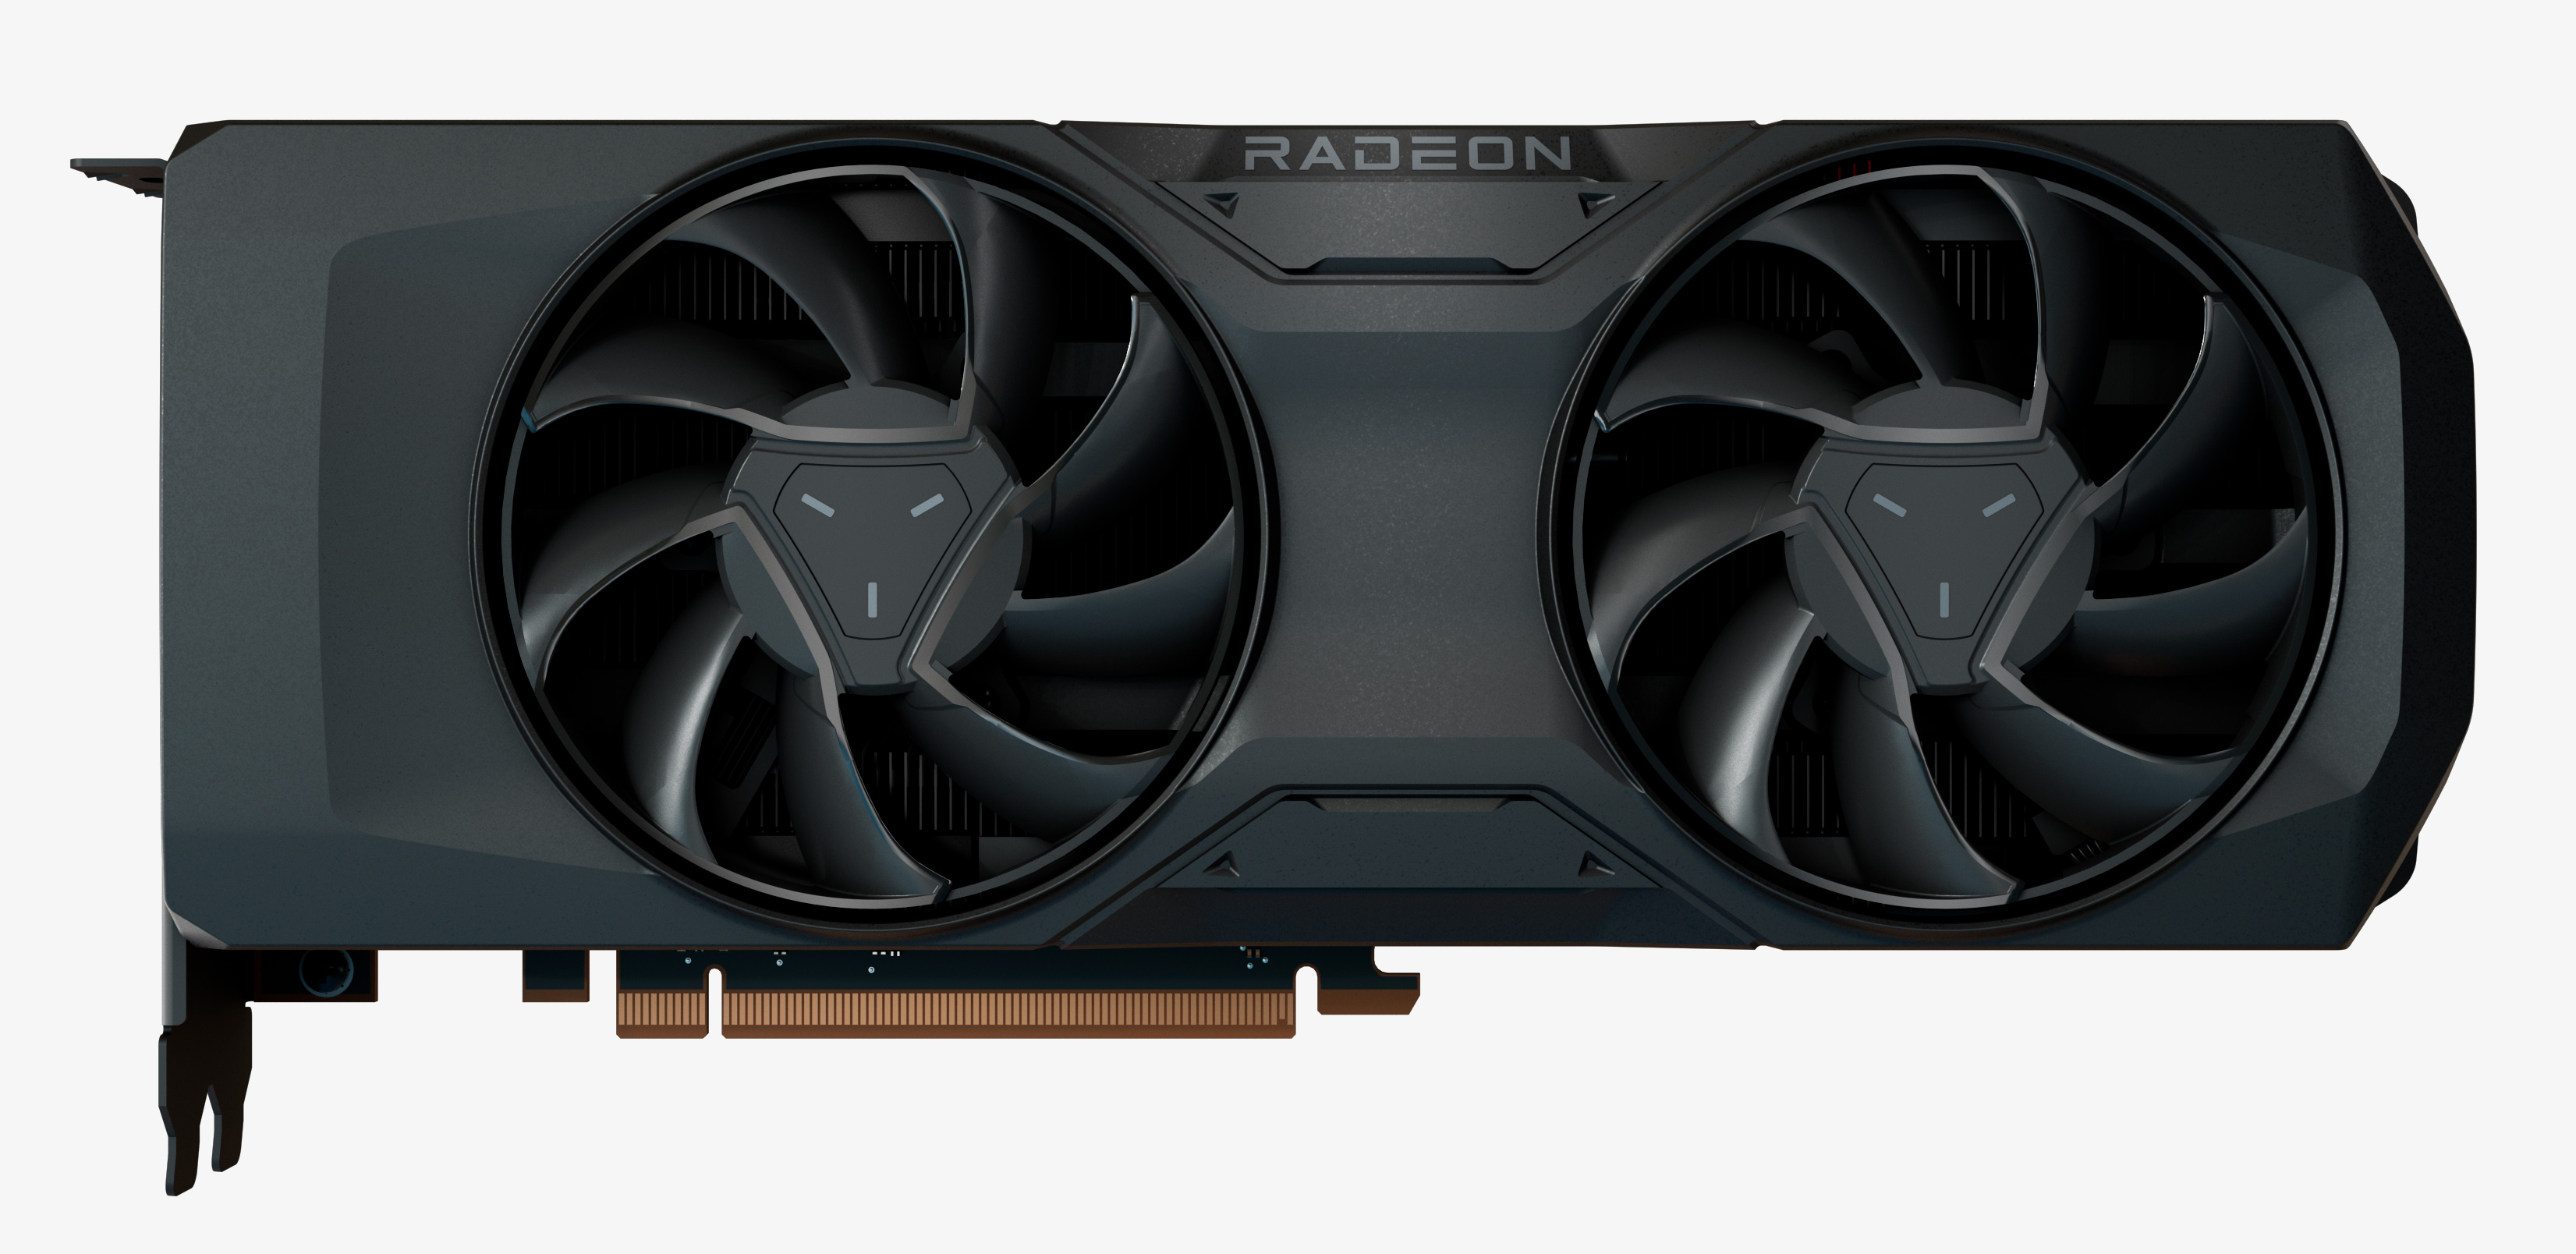 New AMD Radeon RX 7800 XT and Radeon RX 7700 XT Graphics Cards Deliver  High-Performance, Visually Stunning 1440p Gaming Experiences and Superior  Performance-Per-Dollar